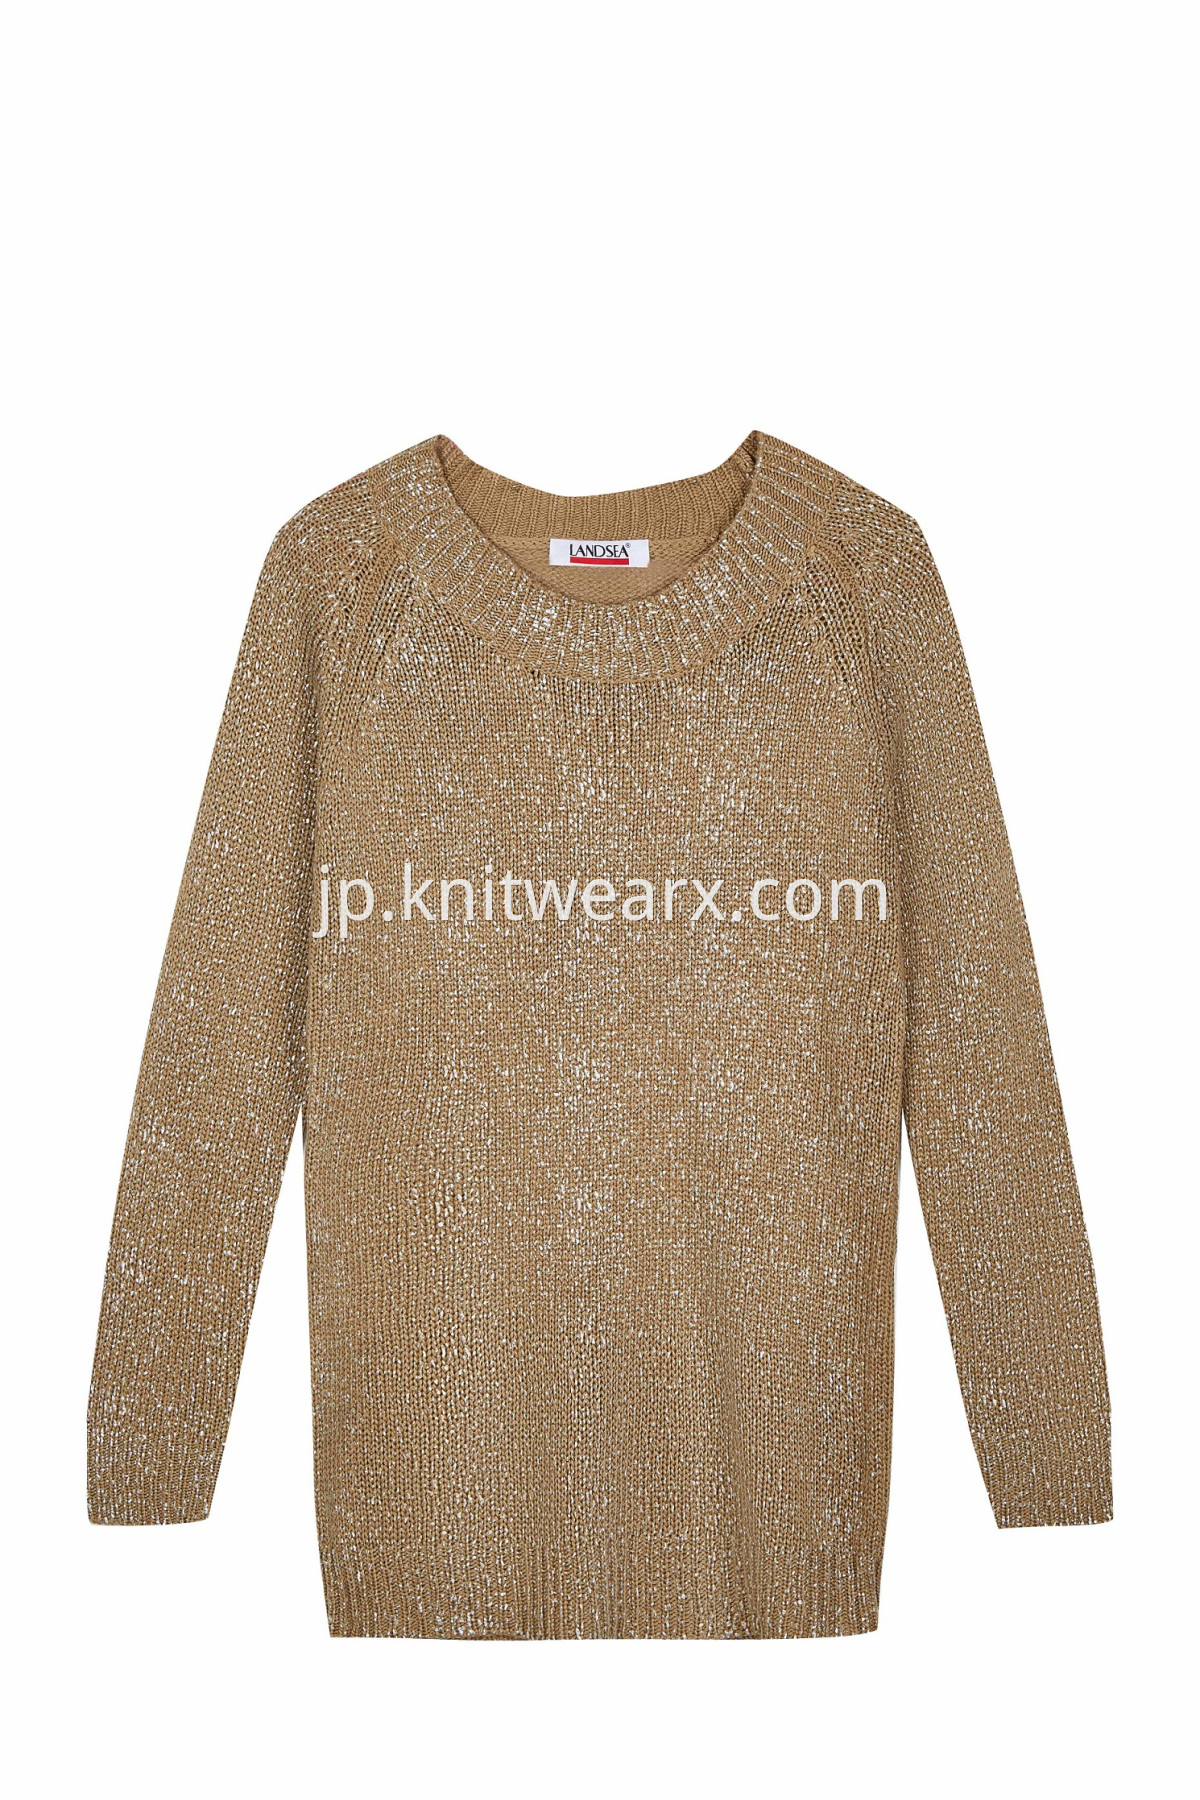 Women‘s Gold Stamping Crew neck Knitted Pullover